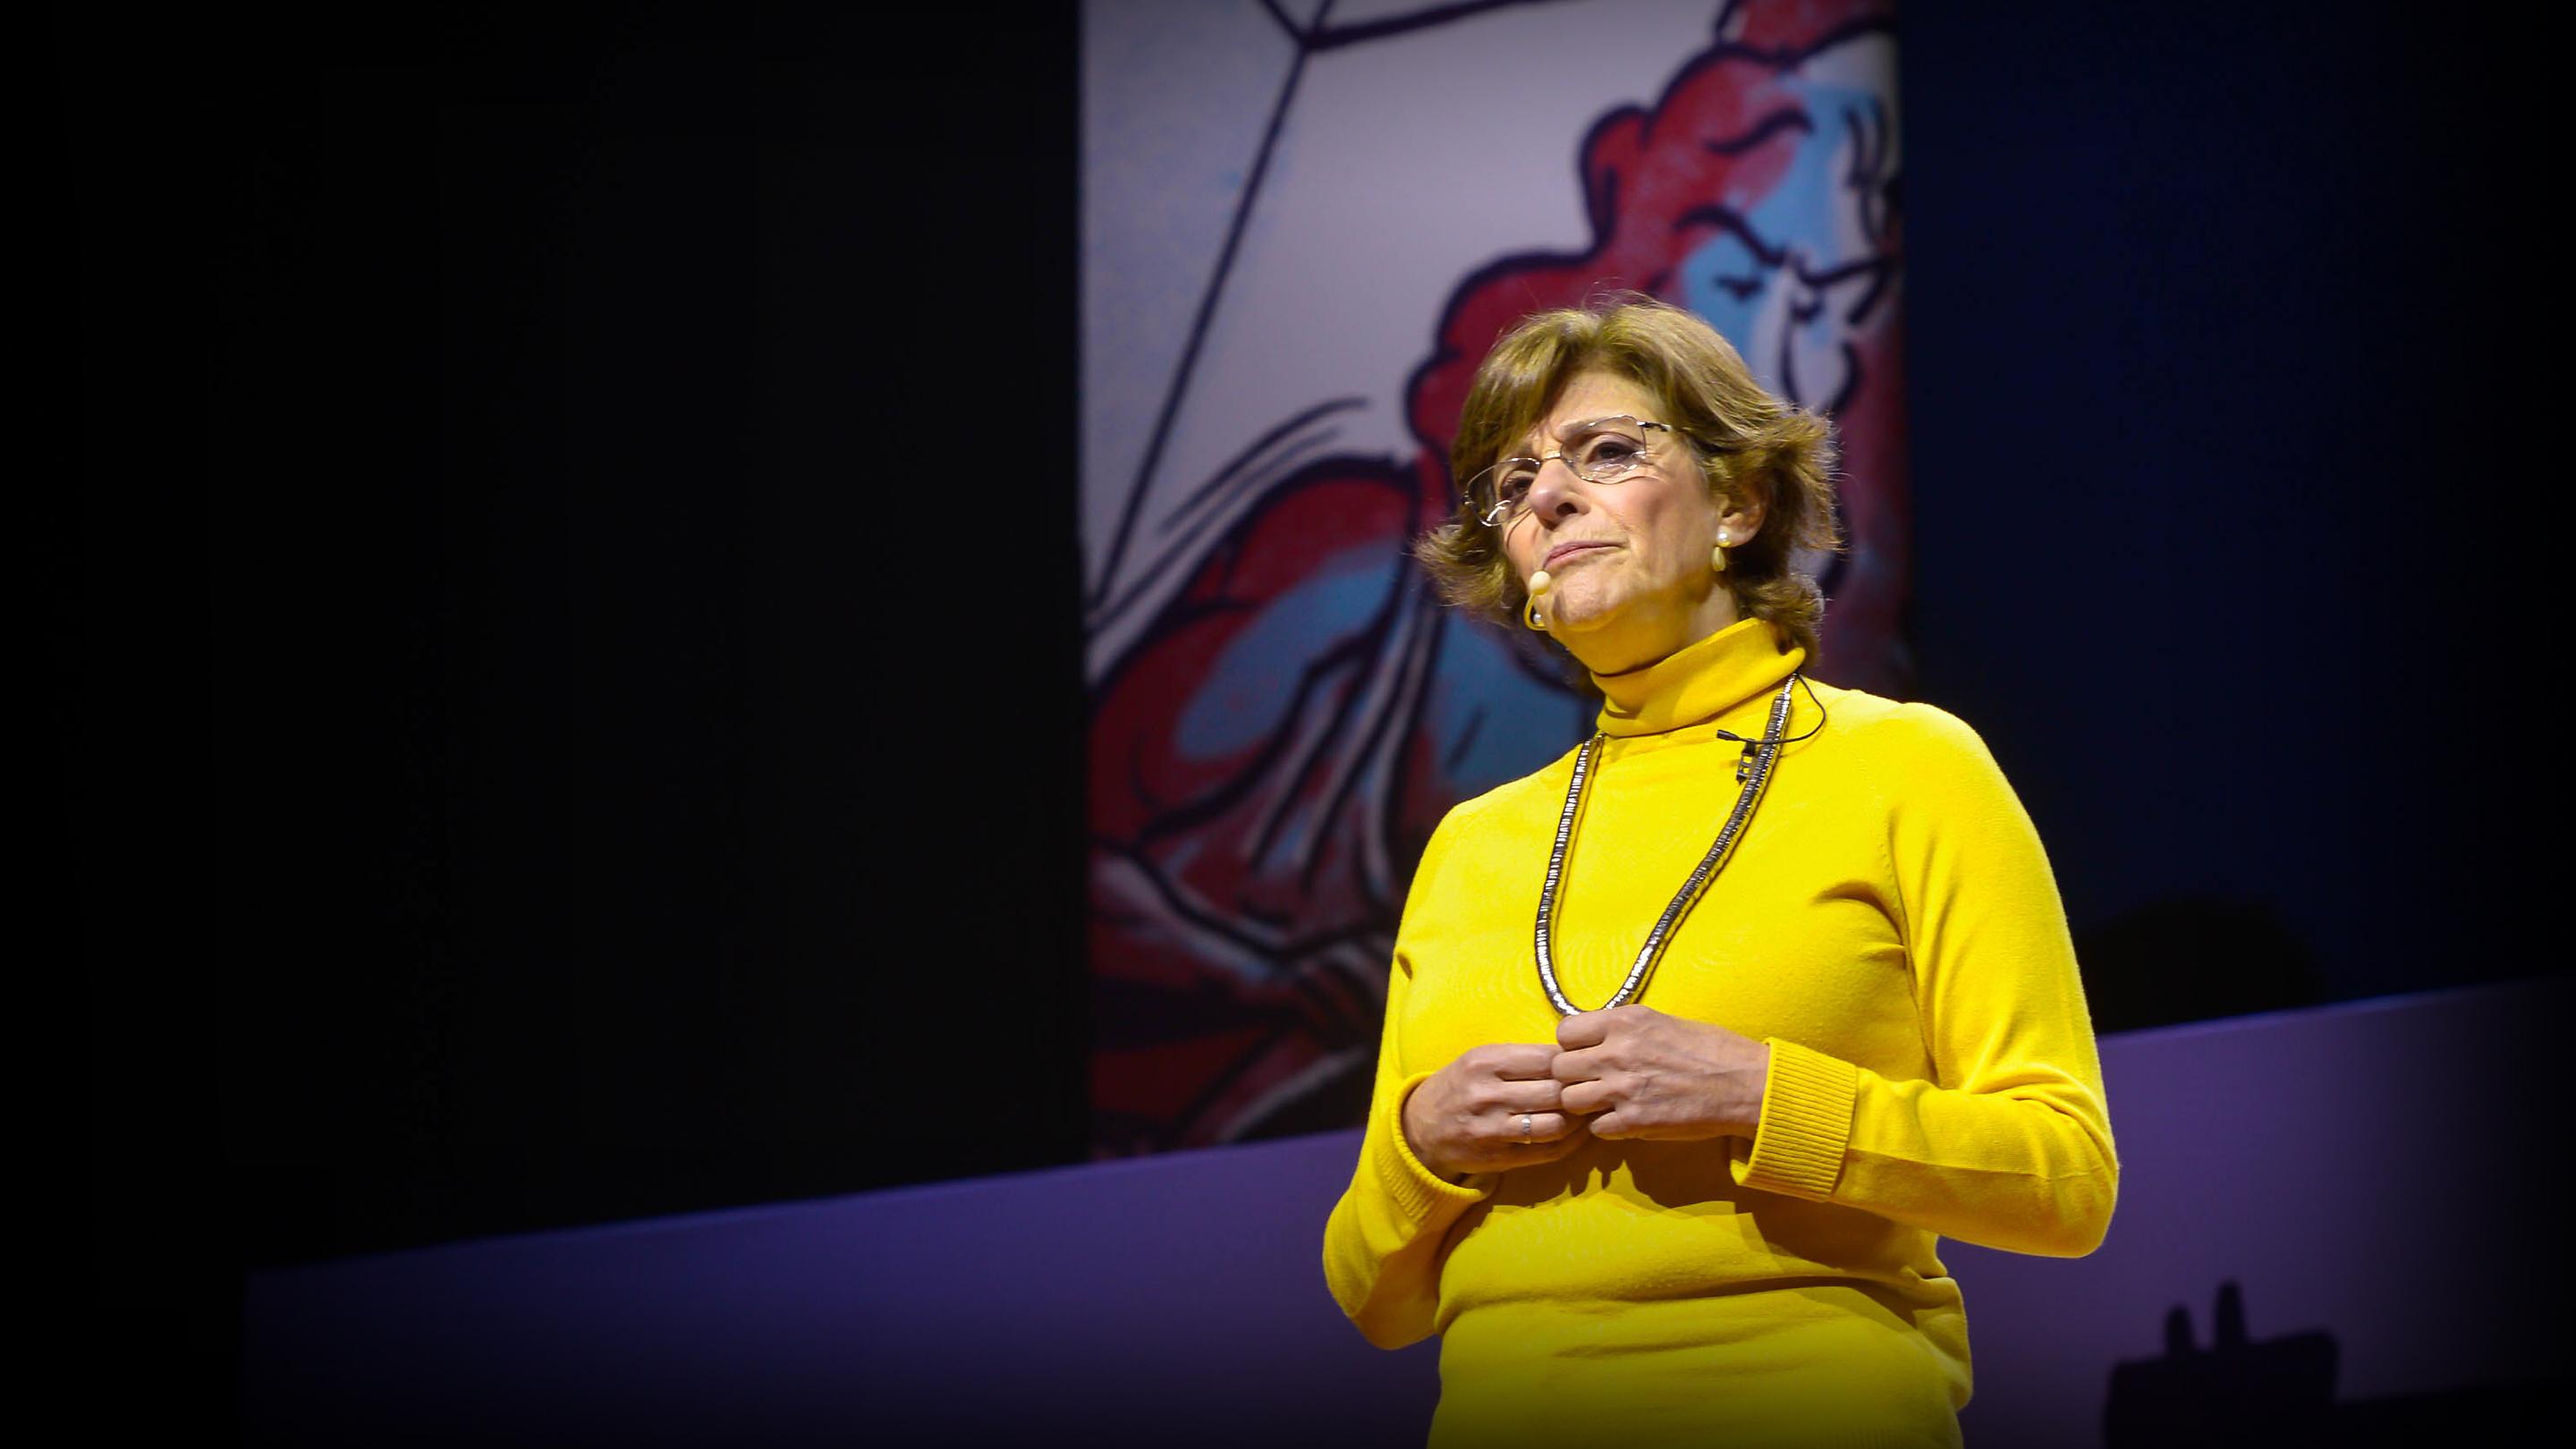 Inés Hercovich: Why women stay silent after sexual assault | TED Talk